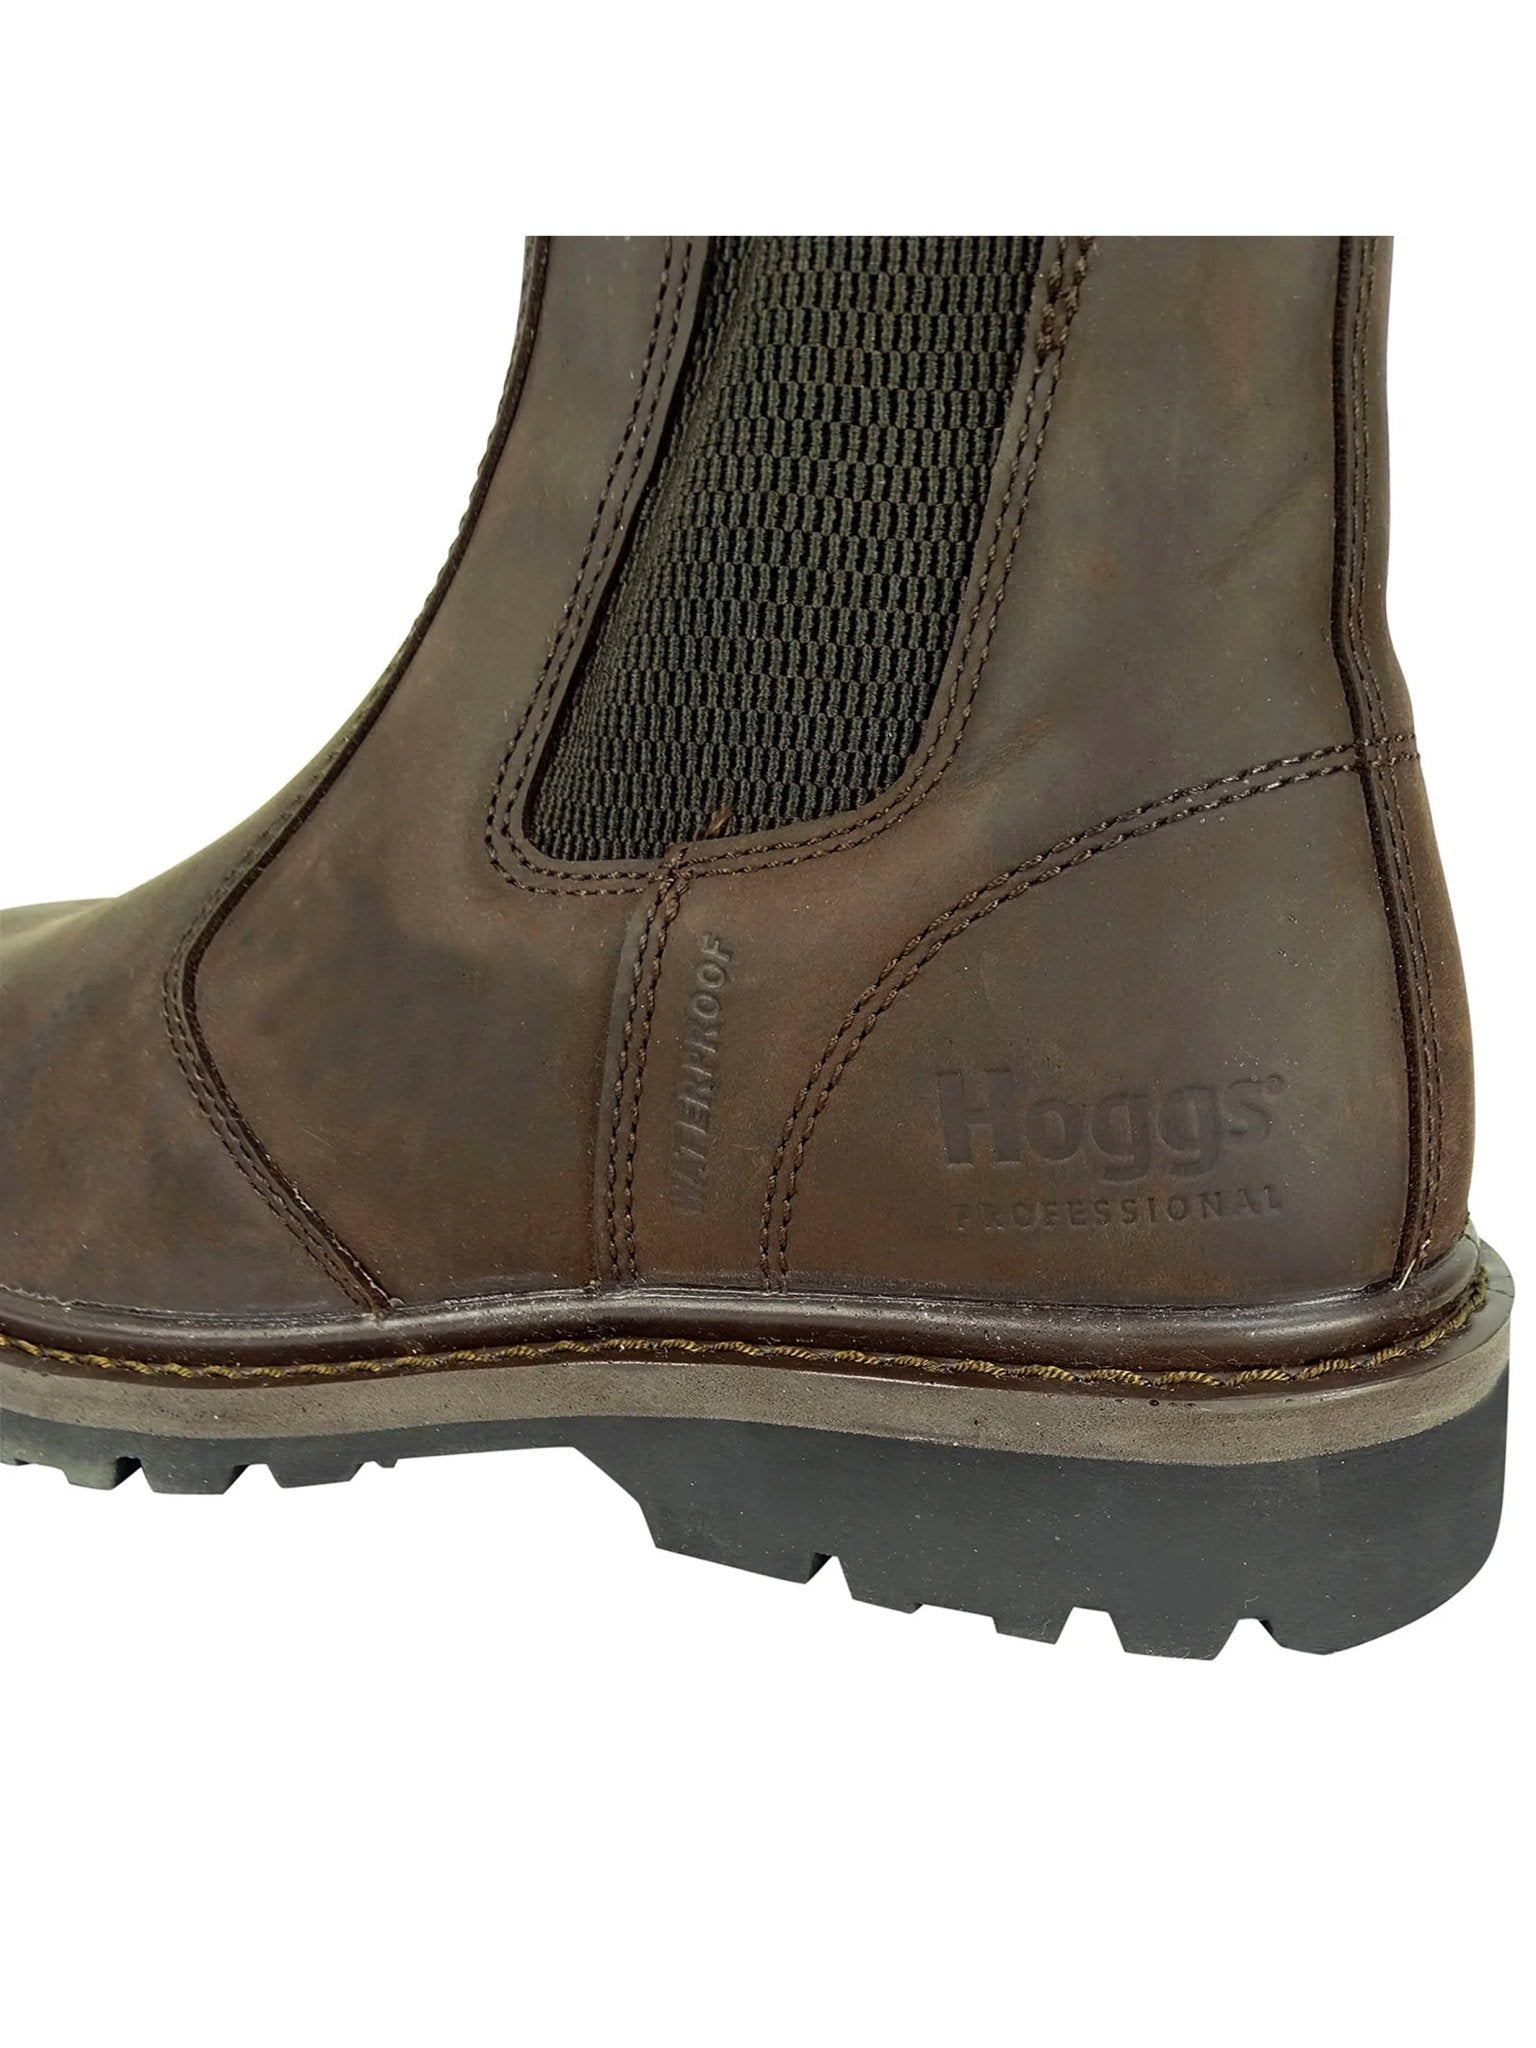 Hoggs of Fife Hoggs of Fife - Zeus Waterproof Safety Chelsea Boots - Waterproof Dealer Safety Boots Safety Footwear